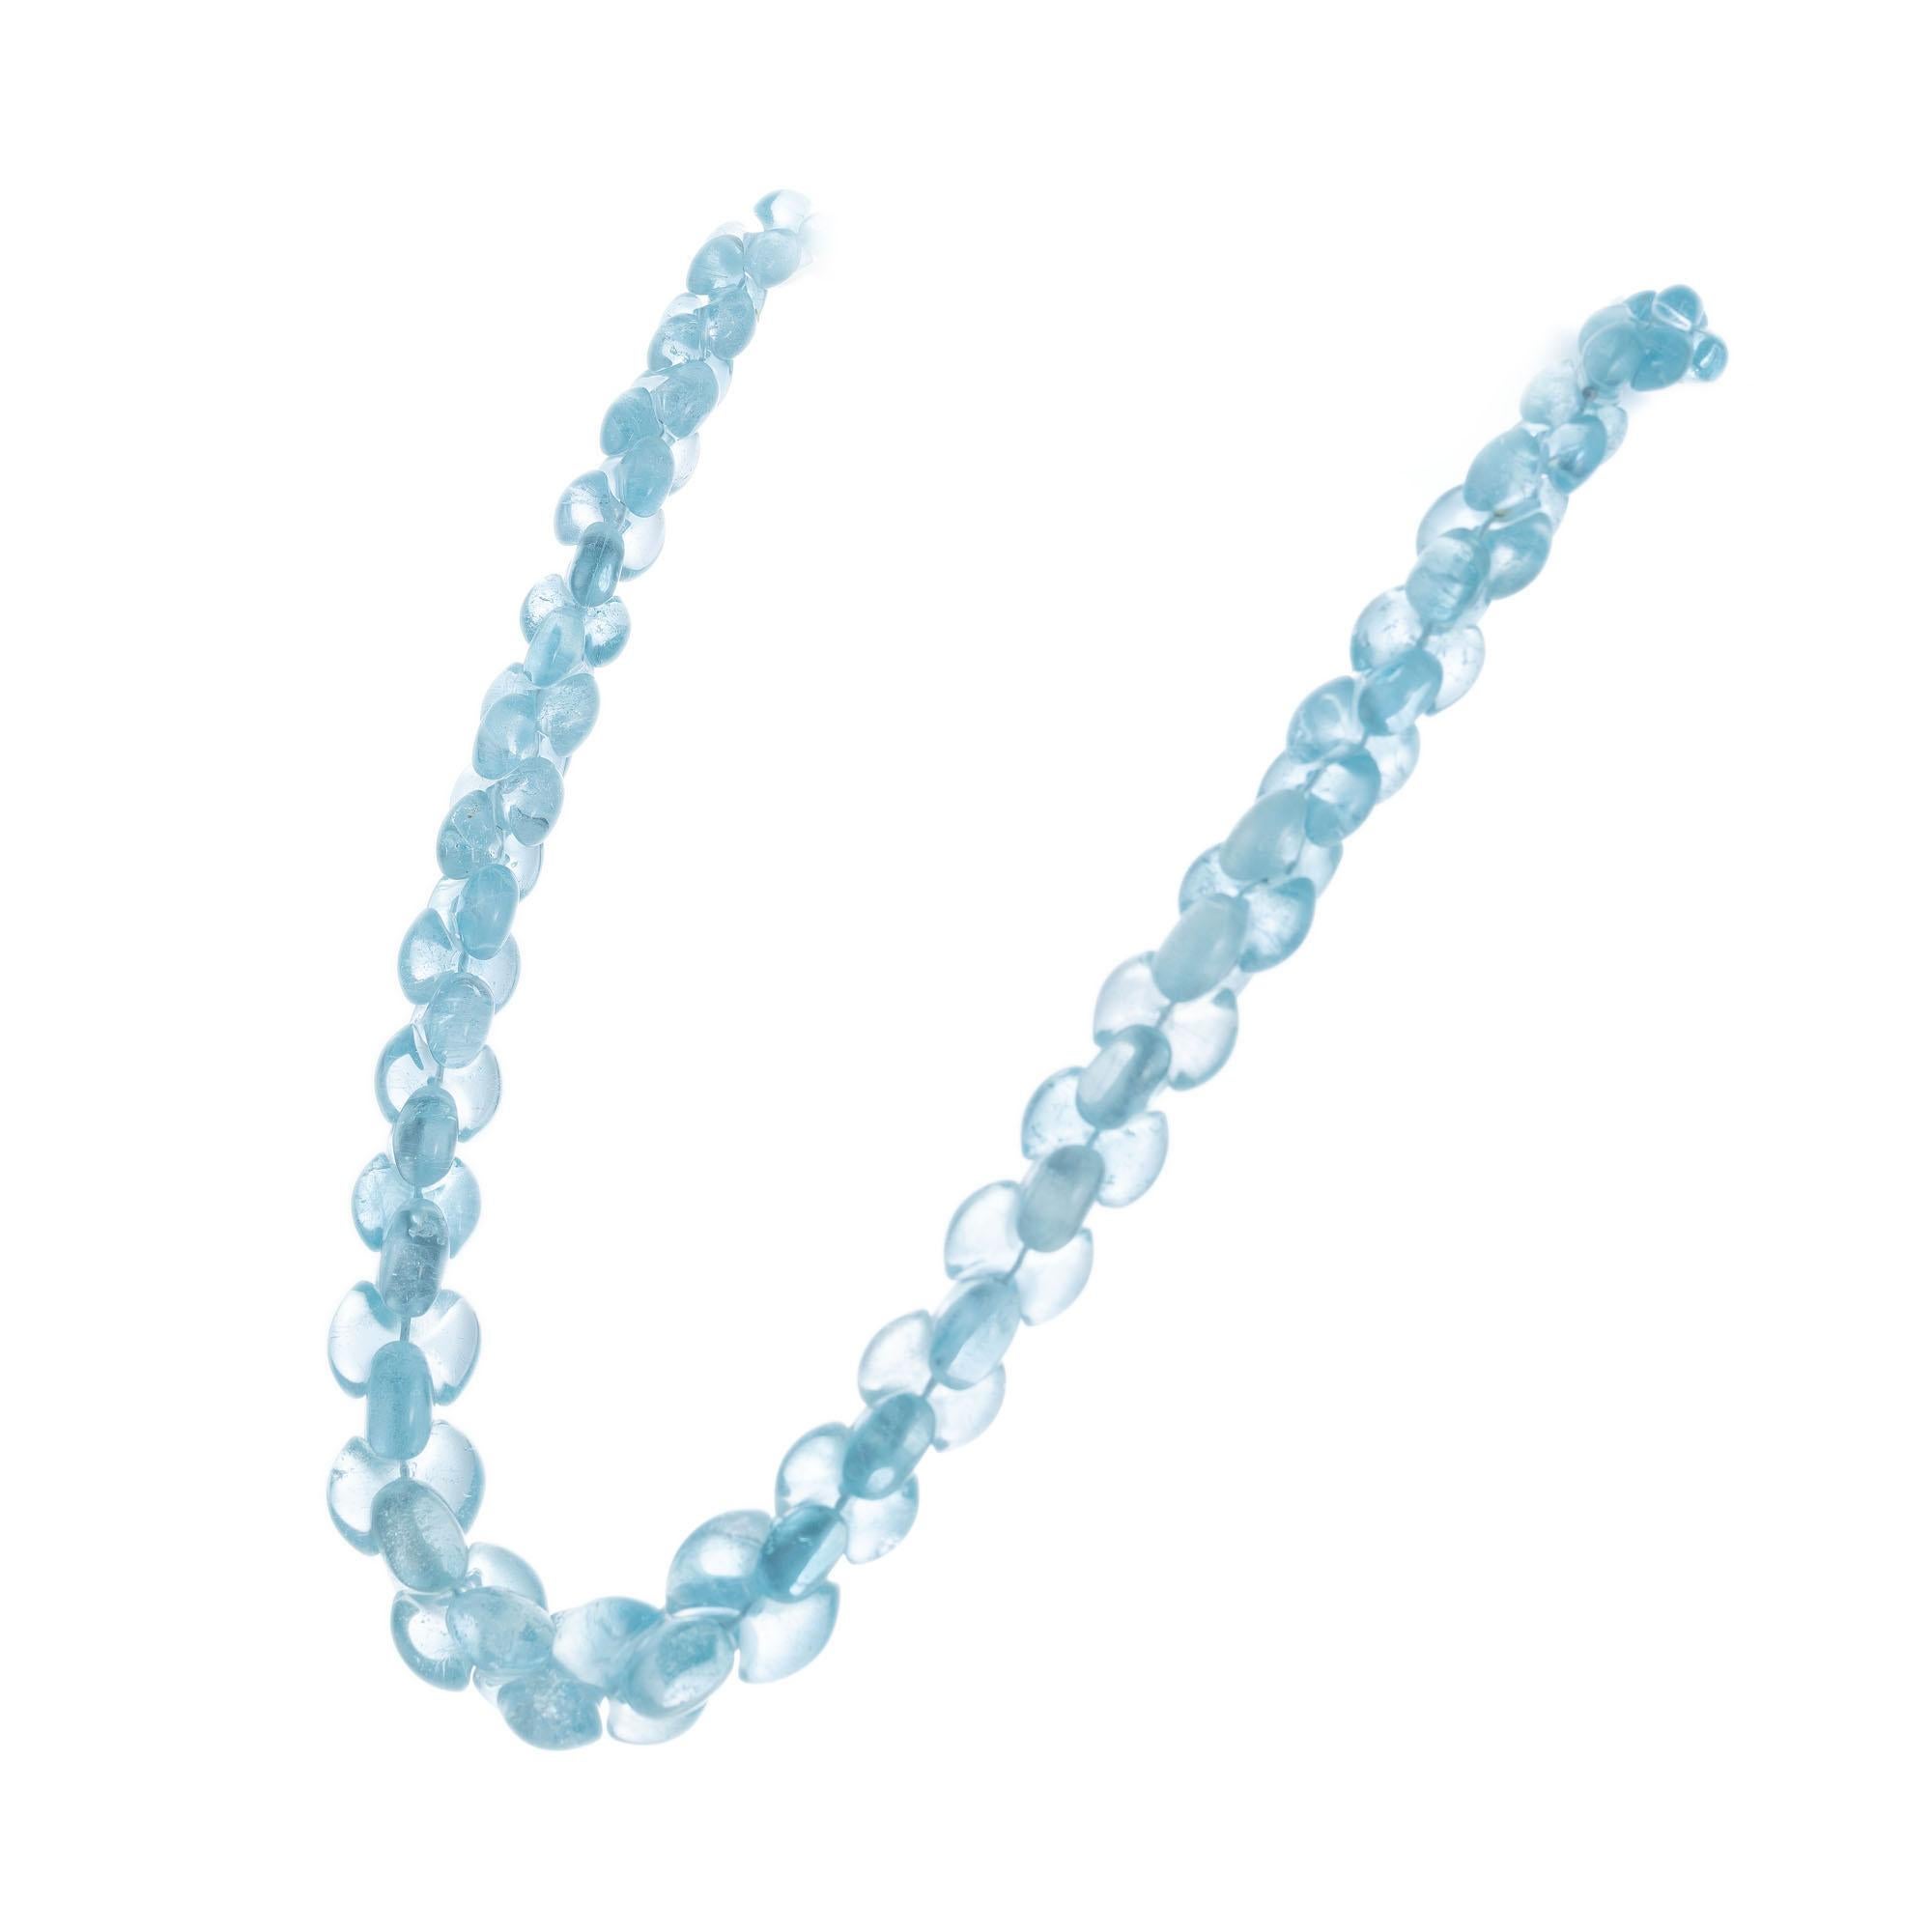 Natural Earth mined untreated blue topaz bow tie style 18 Inch bead necklace with 14k white gold catch.

78 briolette shape light blue topaz beads, approx. 350cts
14k white gold 
Stamped: 14k
107.1 grams
Chain: 18 Inches graduating 9mm-15mm


